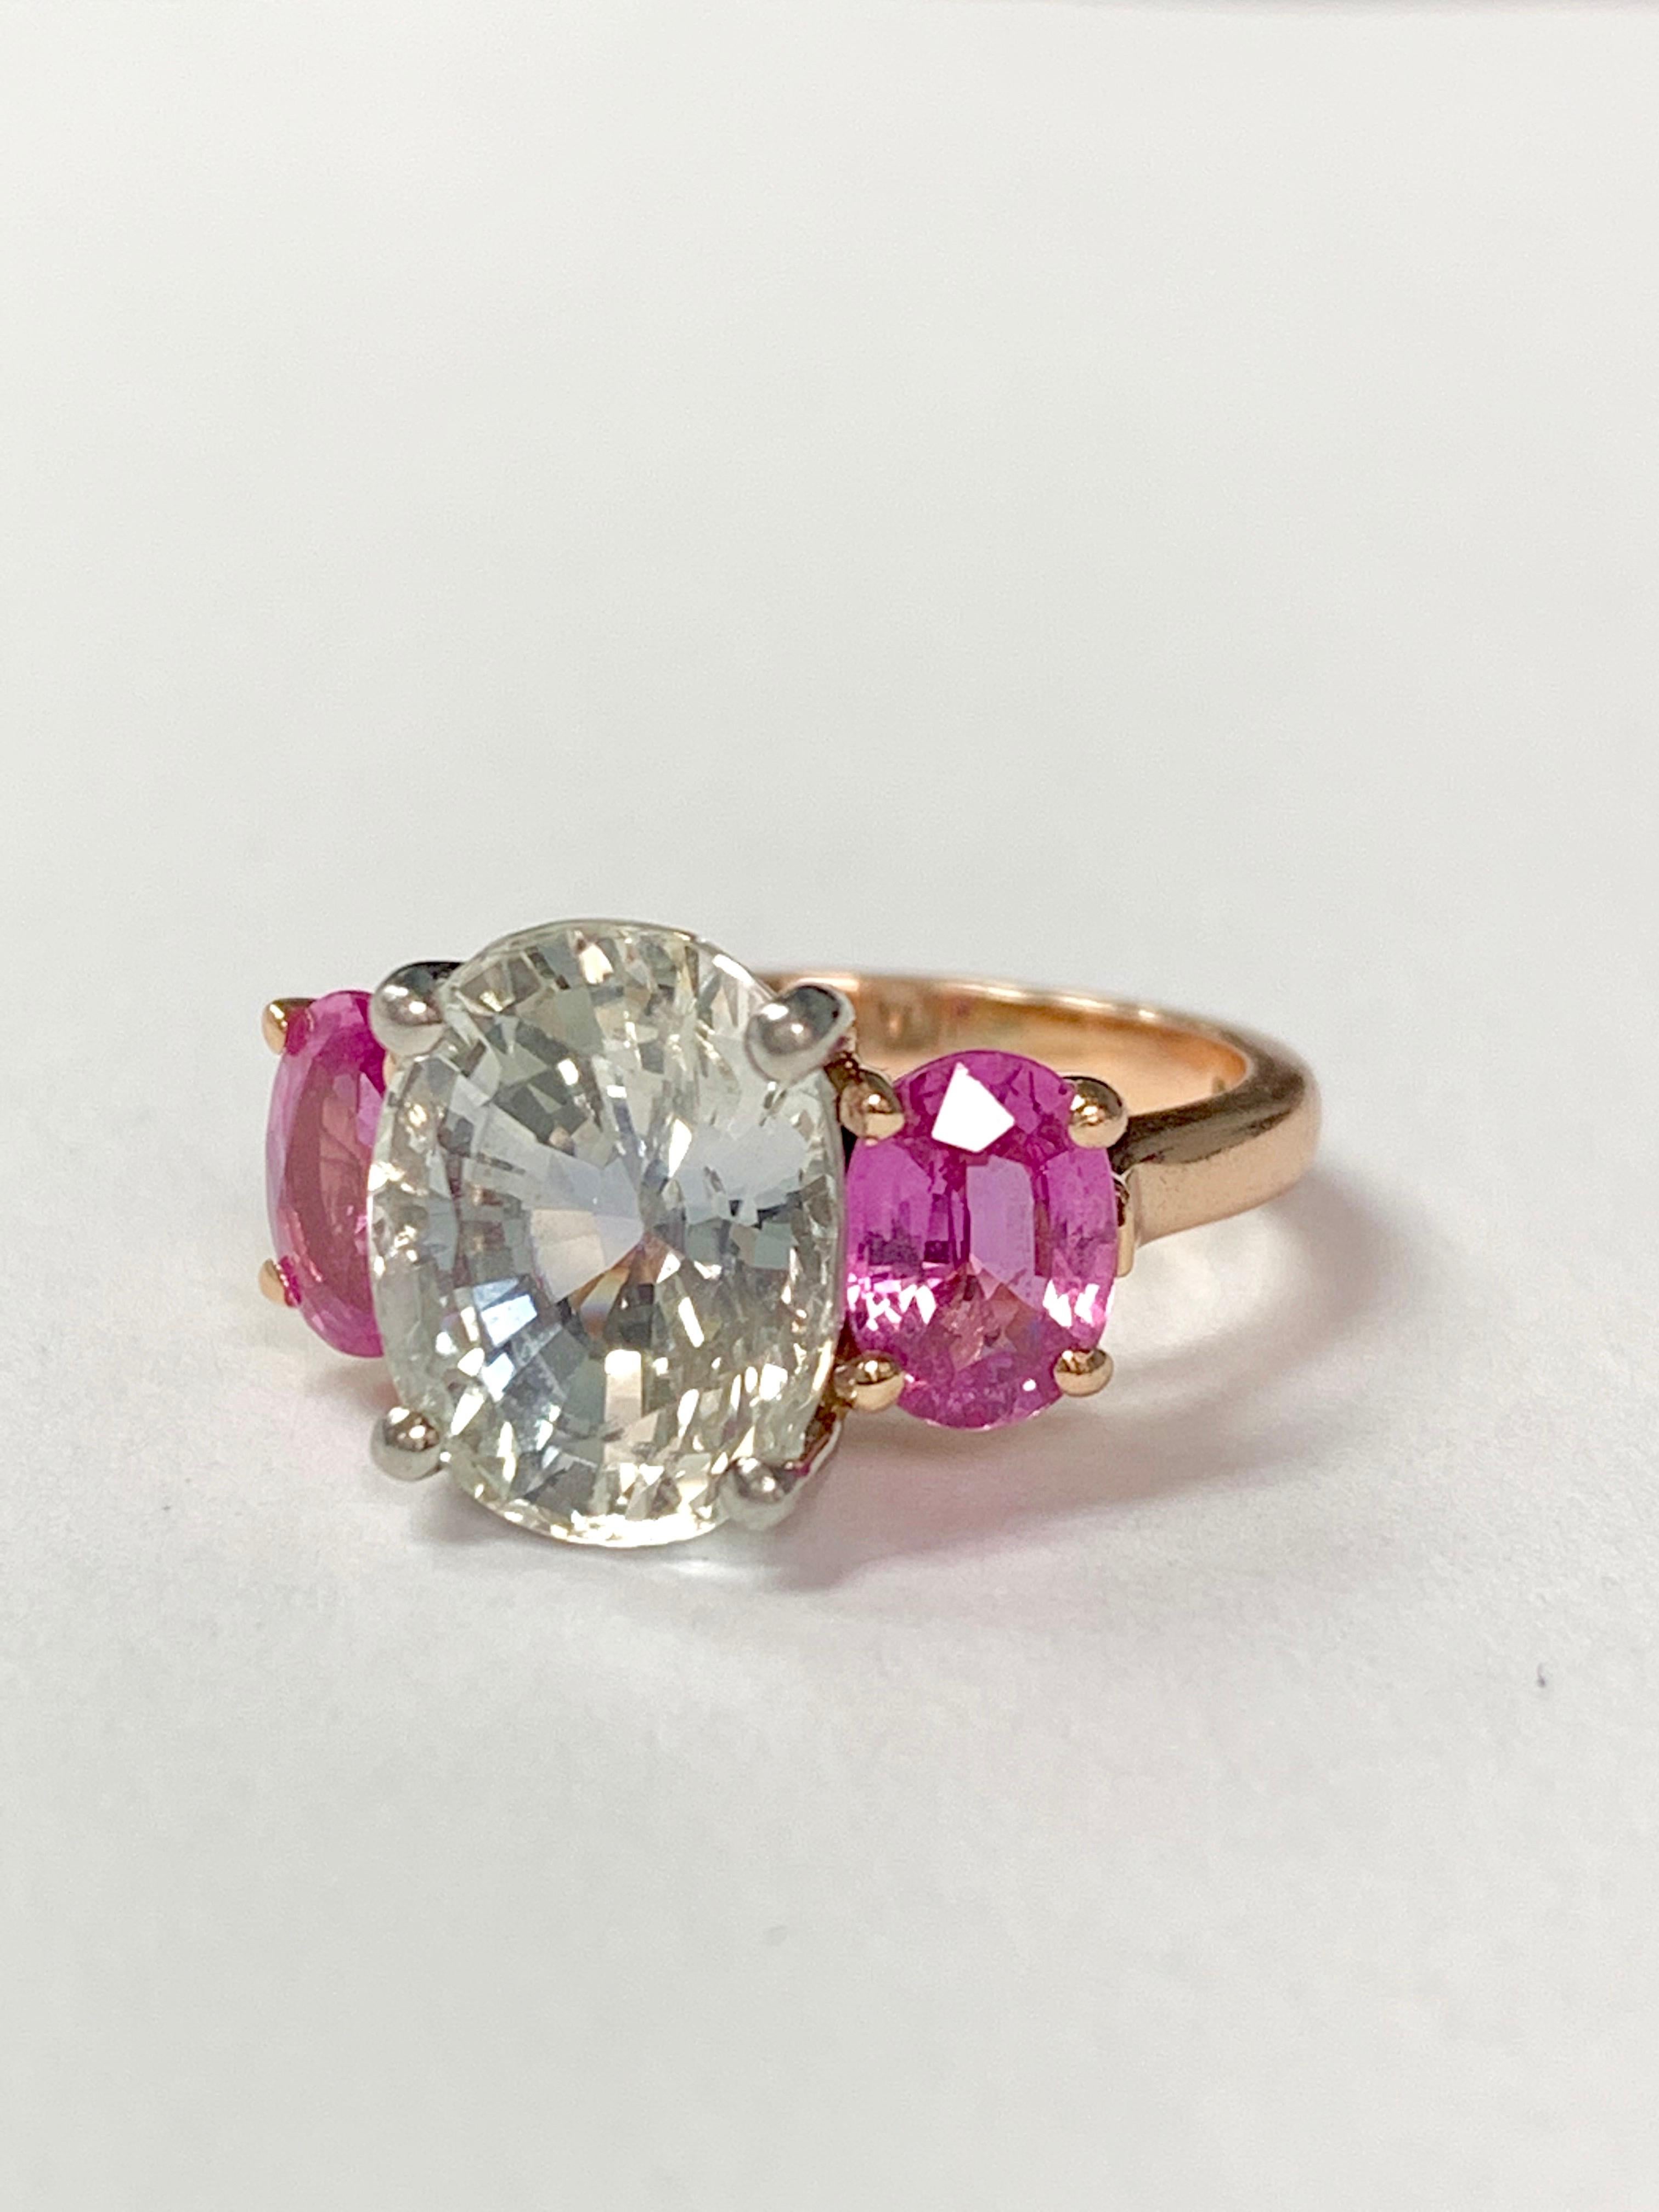 Pale sapphire and pink sapphire ring handmade in 14k and platinum. 
The details are as follows : 
Pale sapphire weight : 8.5 carat 
Pink sapphire weight : 2.5 carat 
Metal : 14K and platinum 



